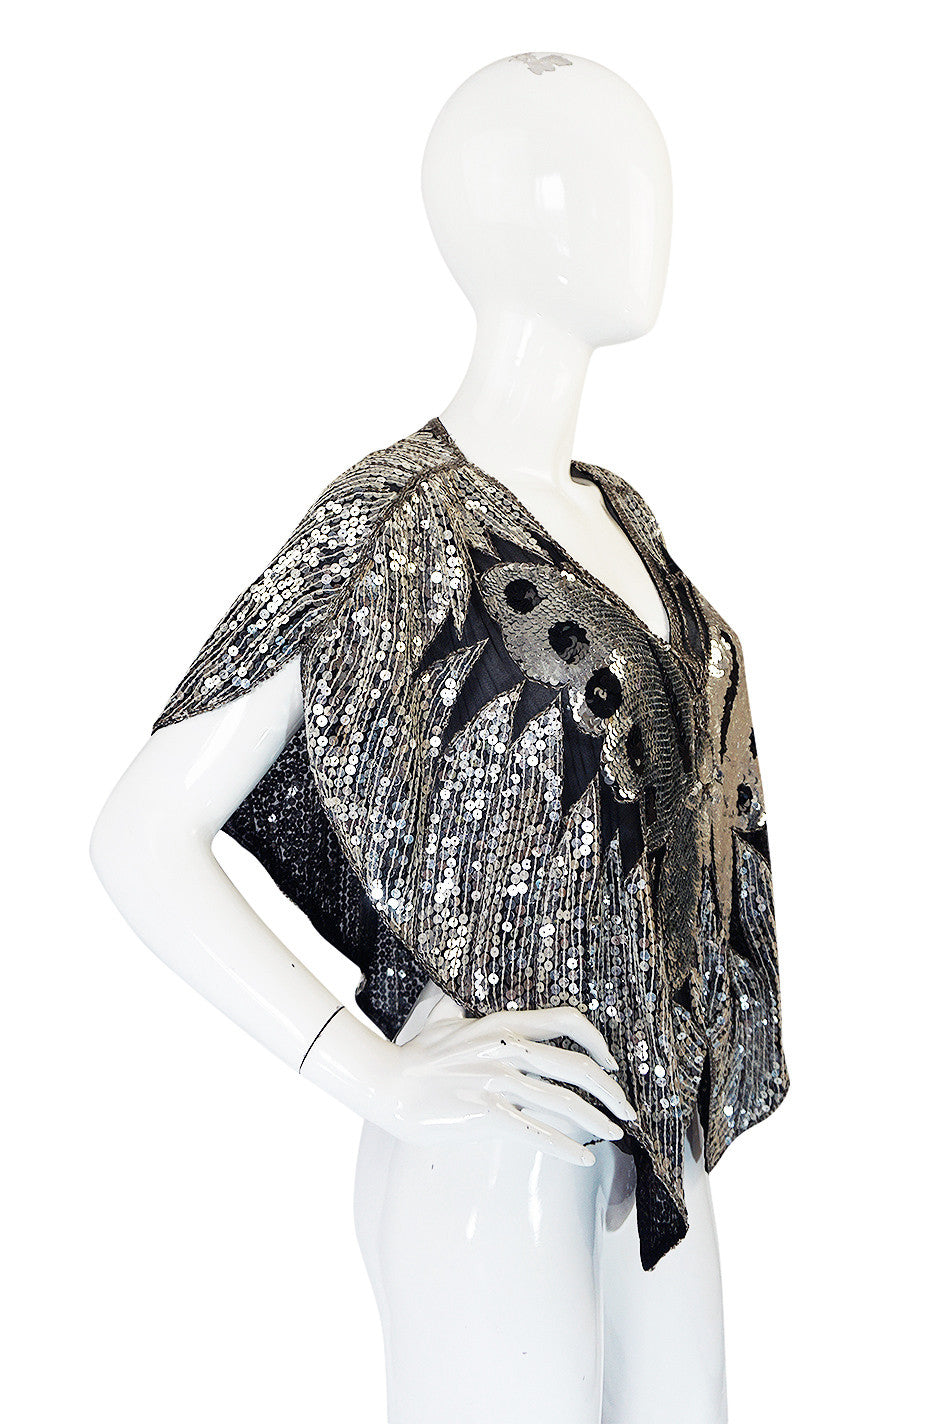 1970s Silver Sequin Butterfly Cape or Top – Shrimpton Couture